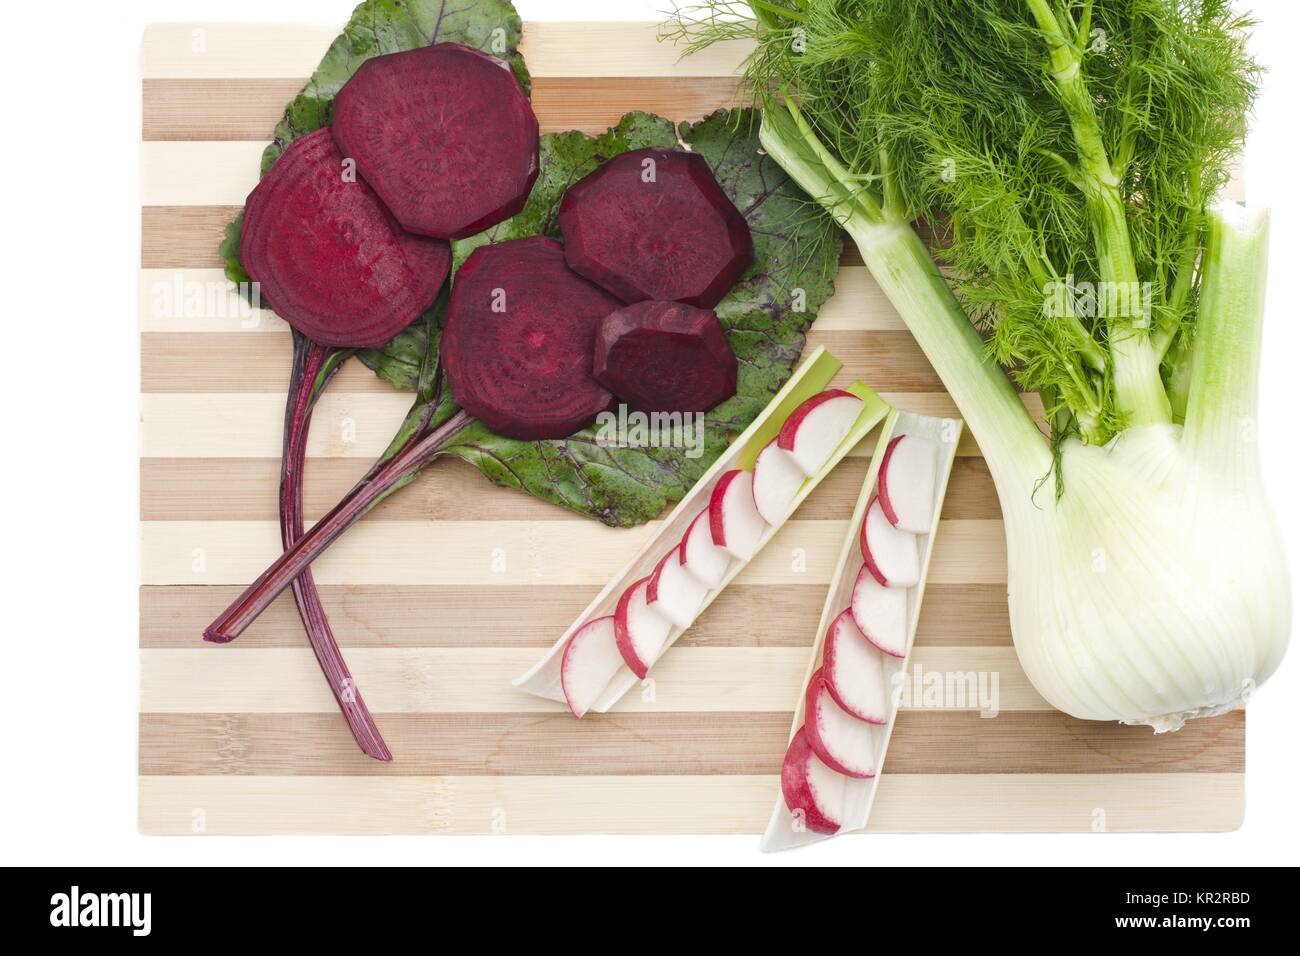 red turnips red radish and fennel Stock Photo